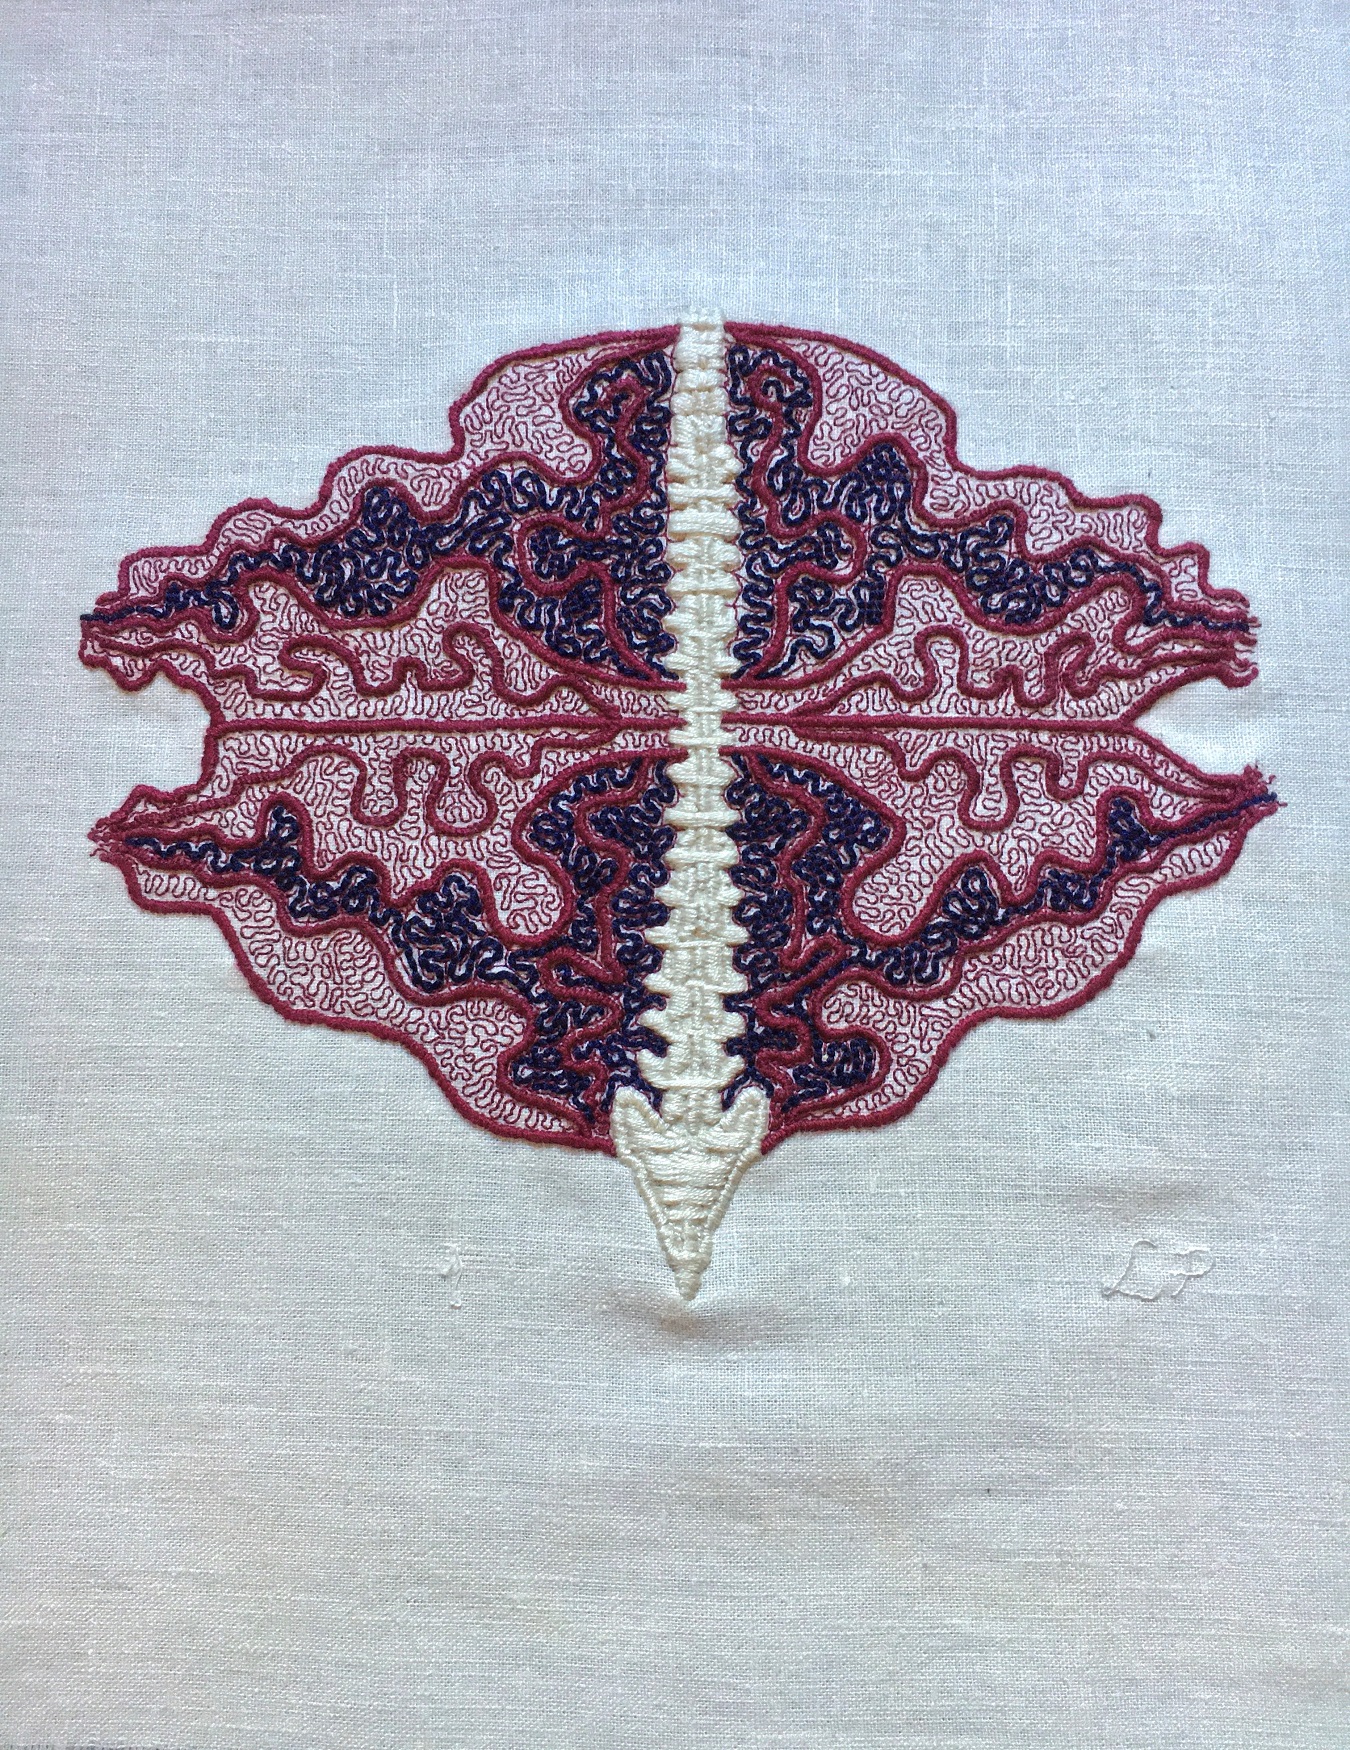 An embroidered piece by Lia Pas